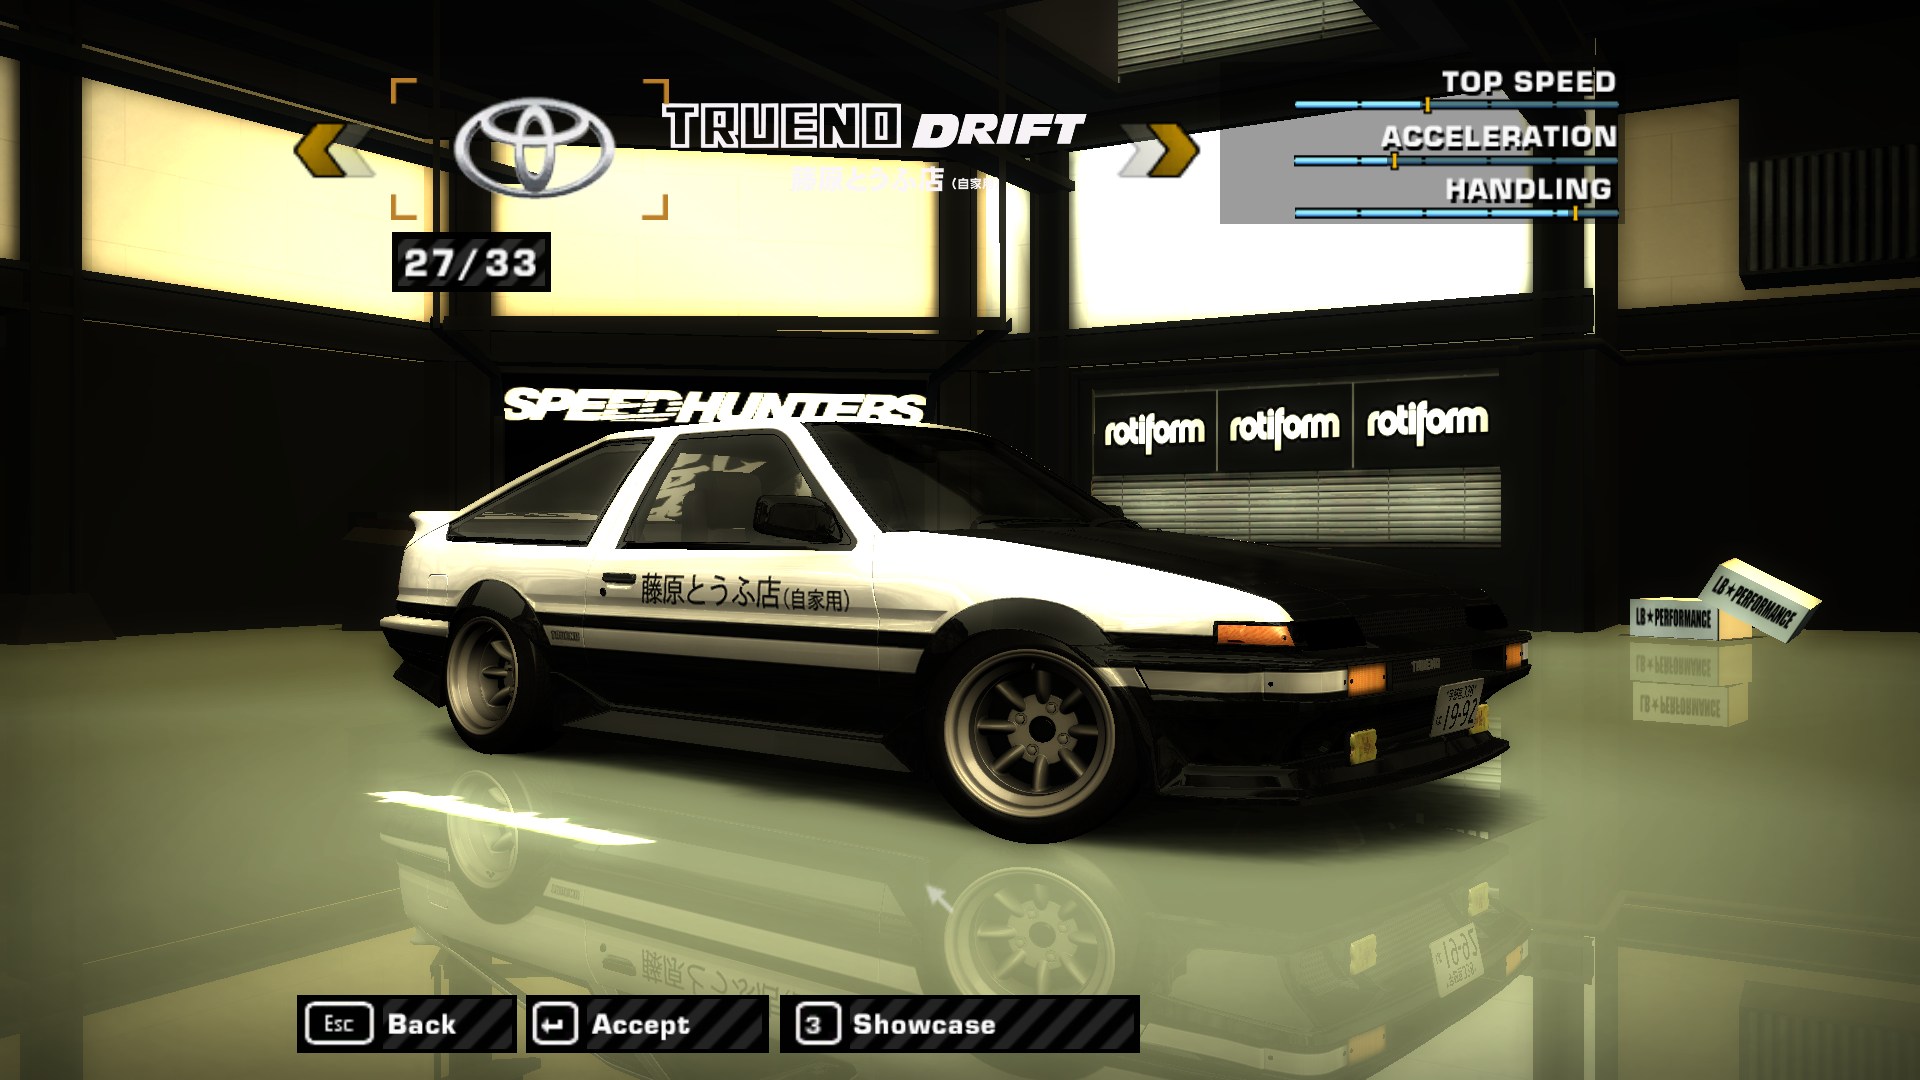 NFSAddons: Your Need for Speed Download Source